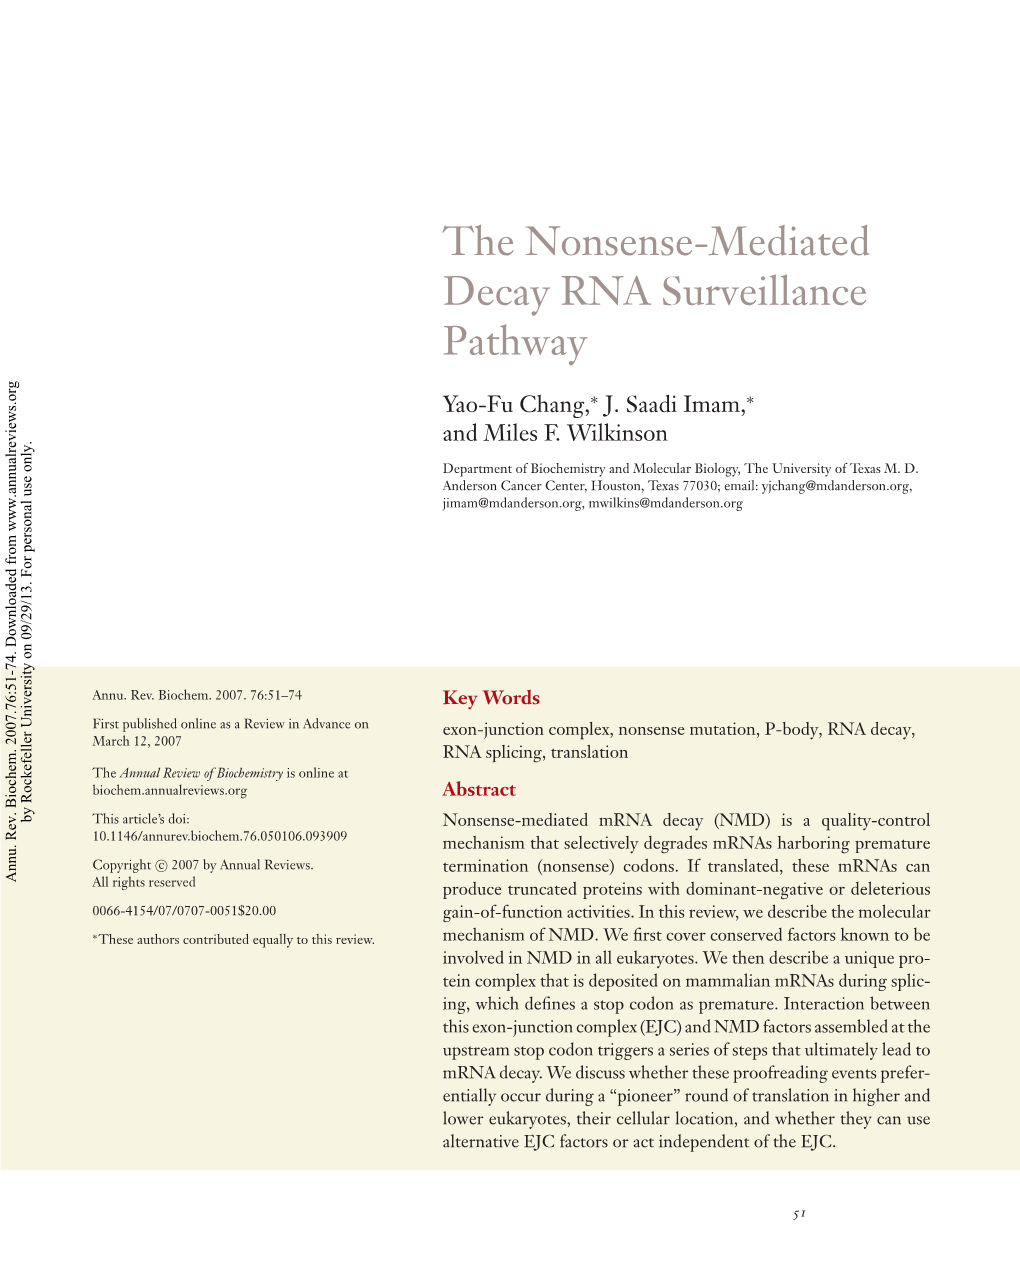 The Nonsense-Mediated Decay RNA Surveillance Pathway